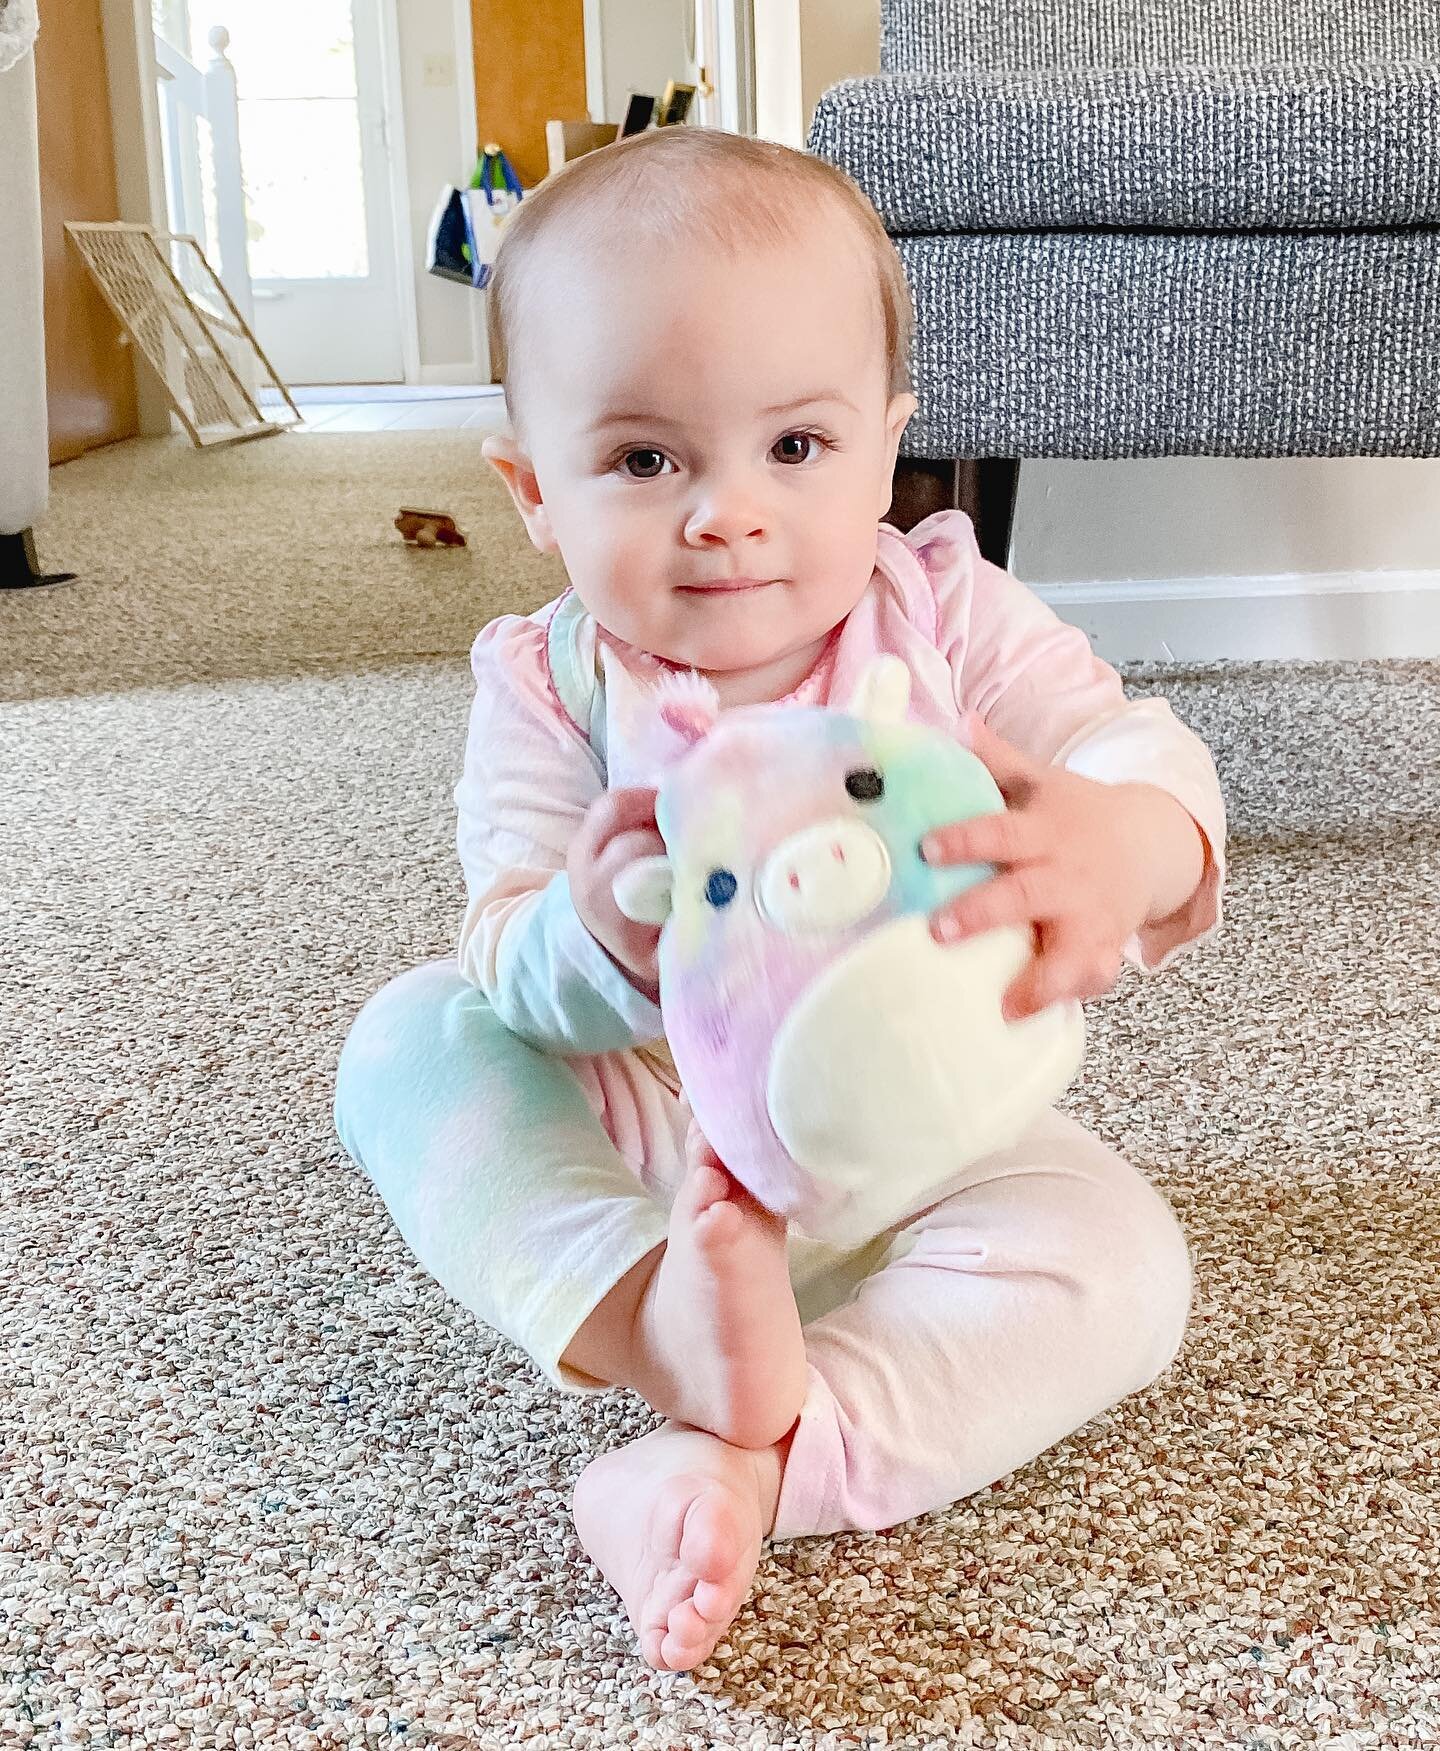 Today my daughter is eleven months old🌟
-
To celebrate the occasion, she is dressed to match her favorite toy: a rainbow tie-dye unicorn we call Bob. 🌈🦄
-
I read somewhere that parenthood is &lsquo;the constant tension between counting down the ho